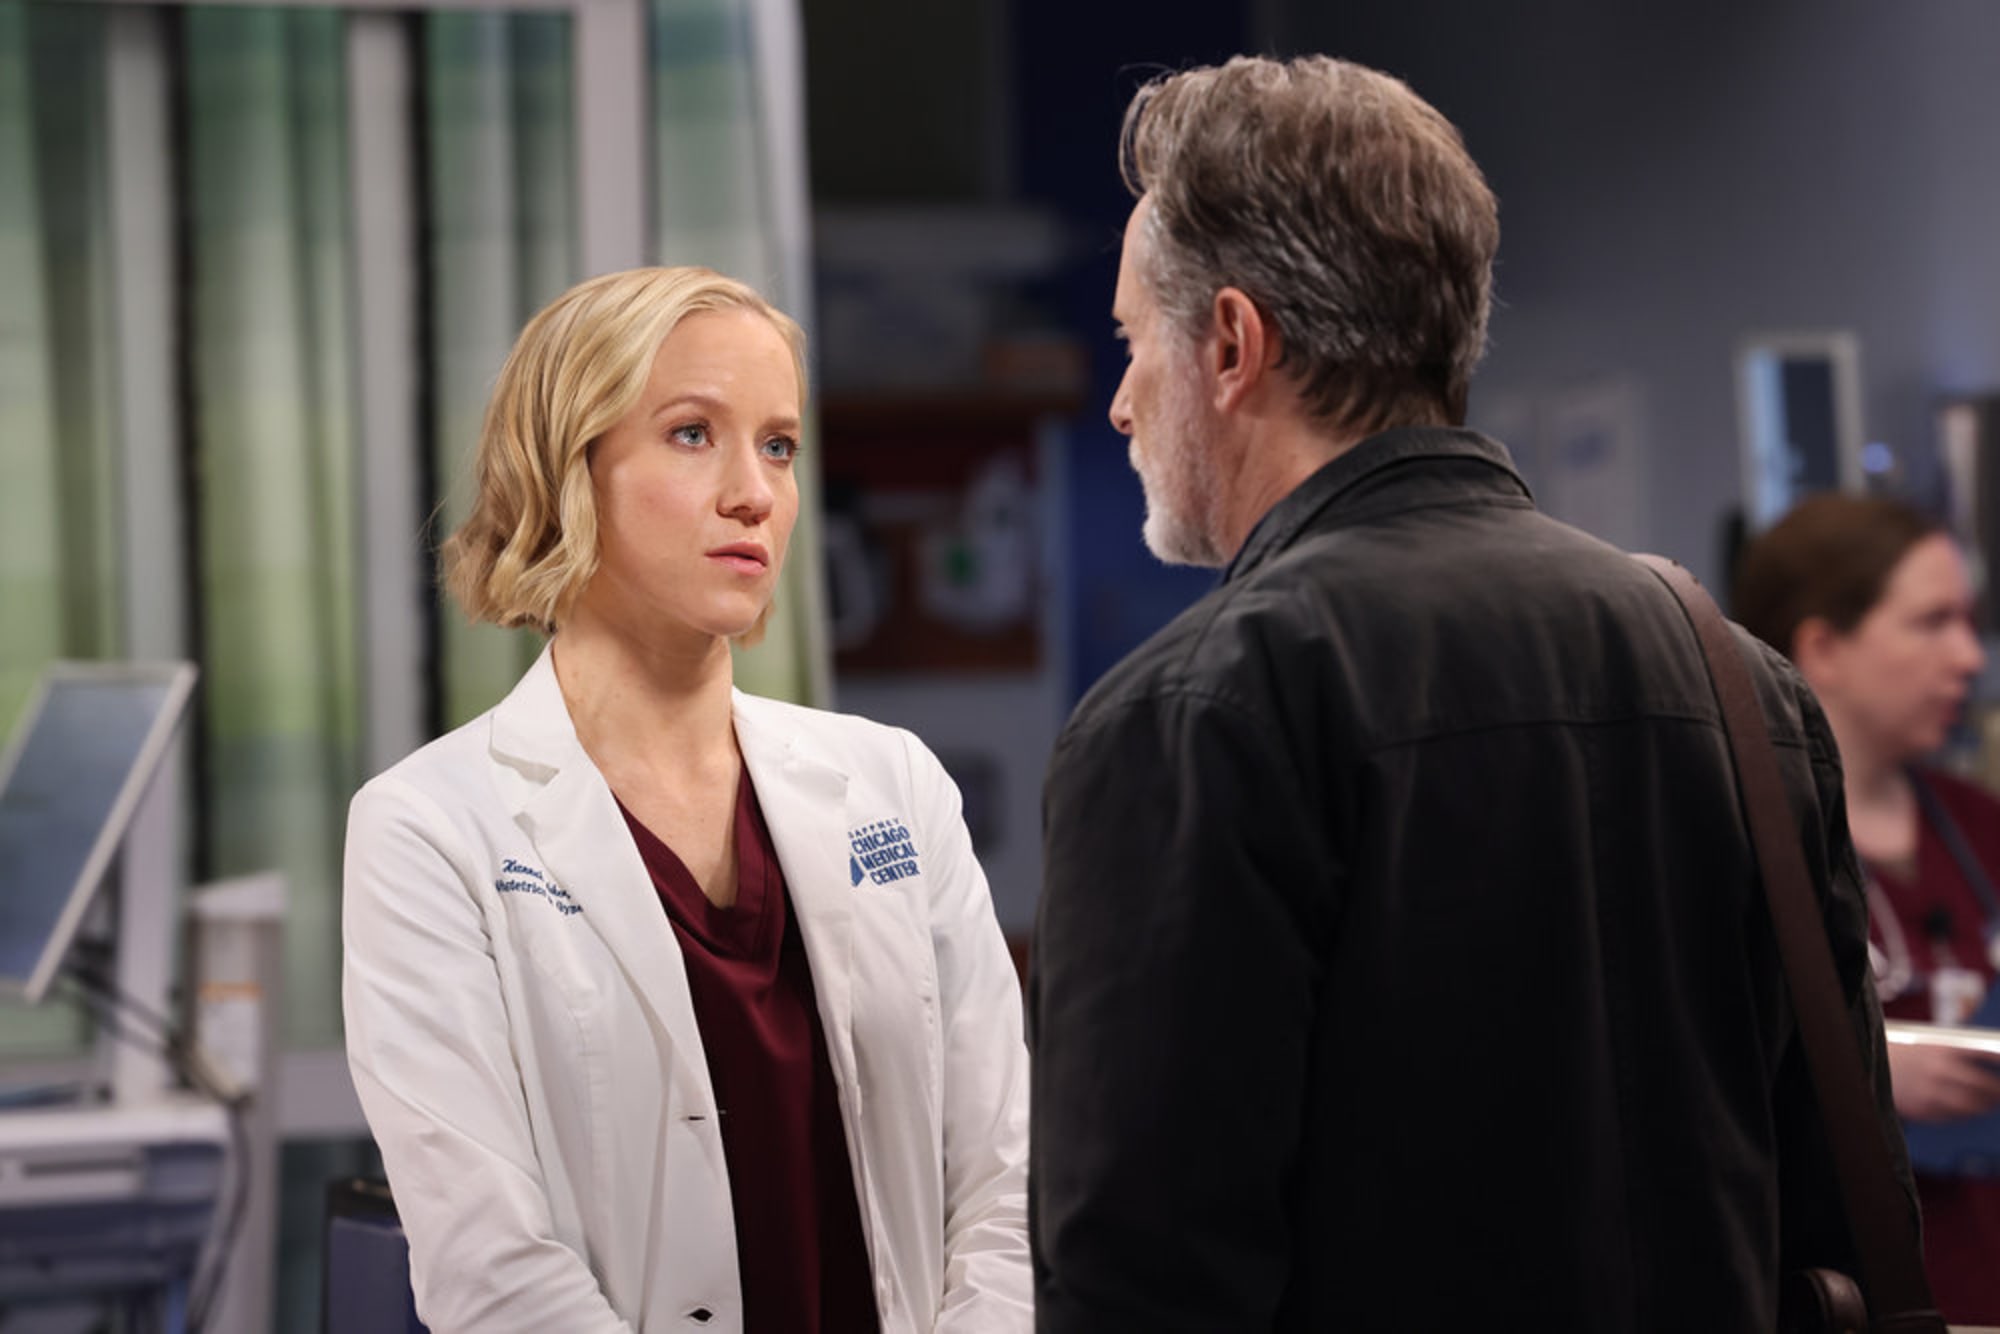 Is Chicago Med renewed for season 9? (Is Chicago Med cancelled?)